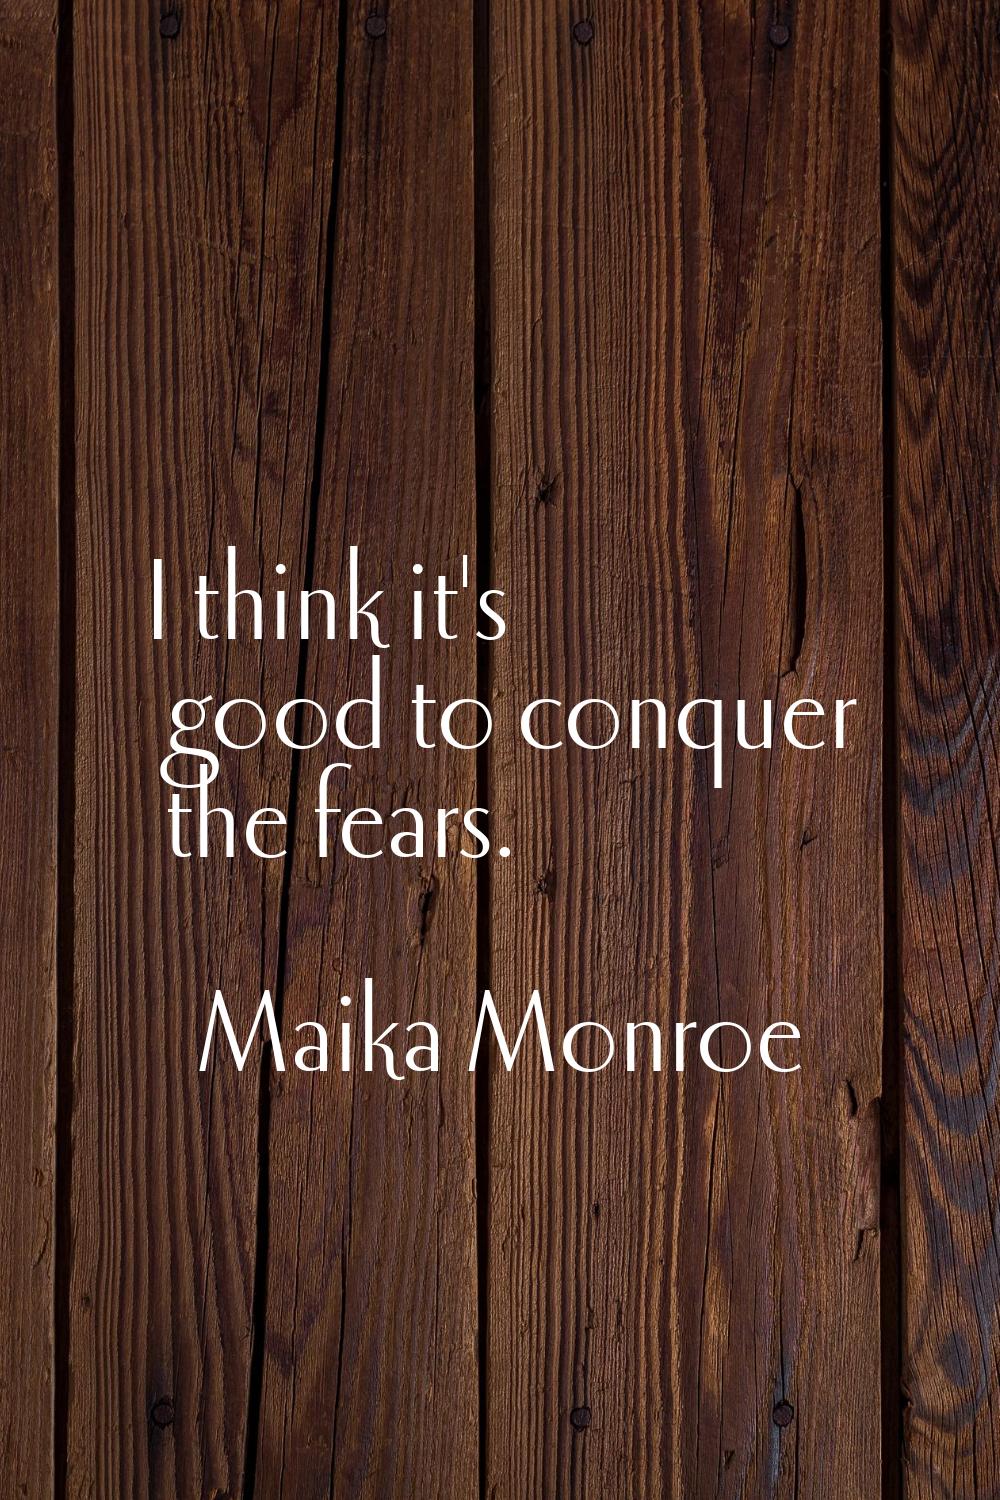 I think it's good to conquer the fears.